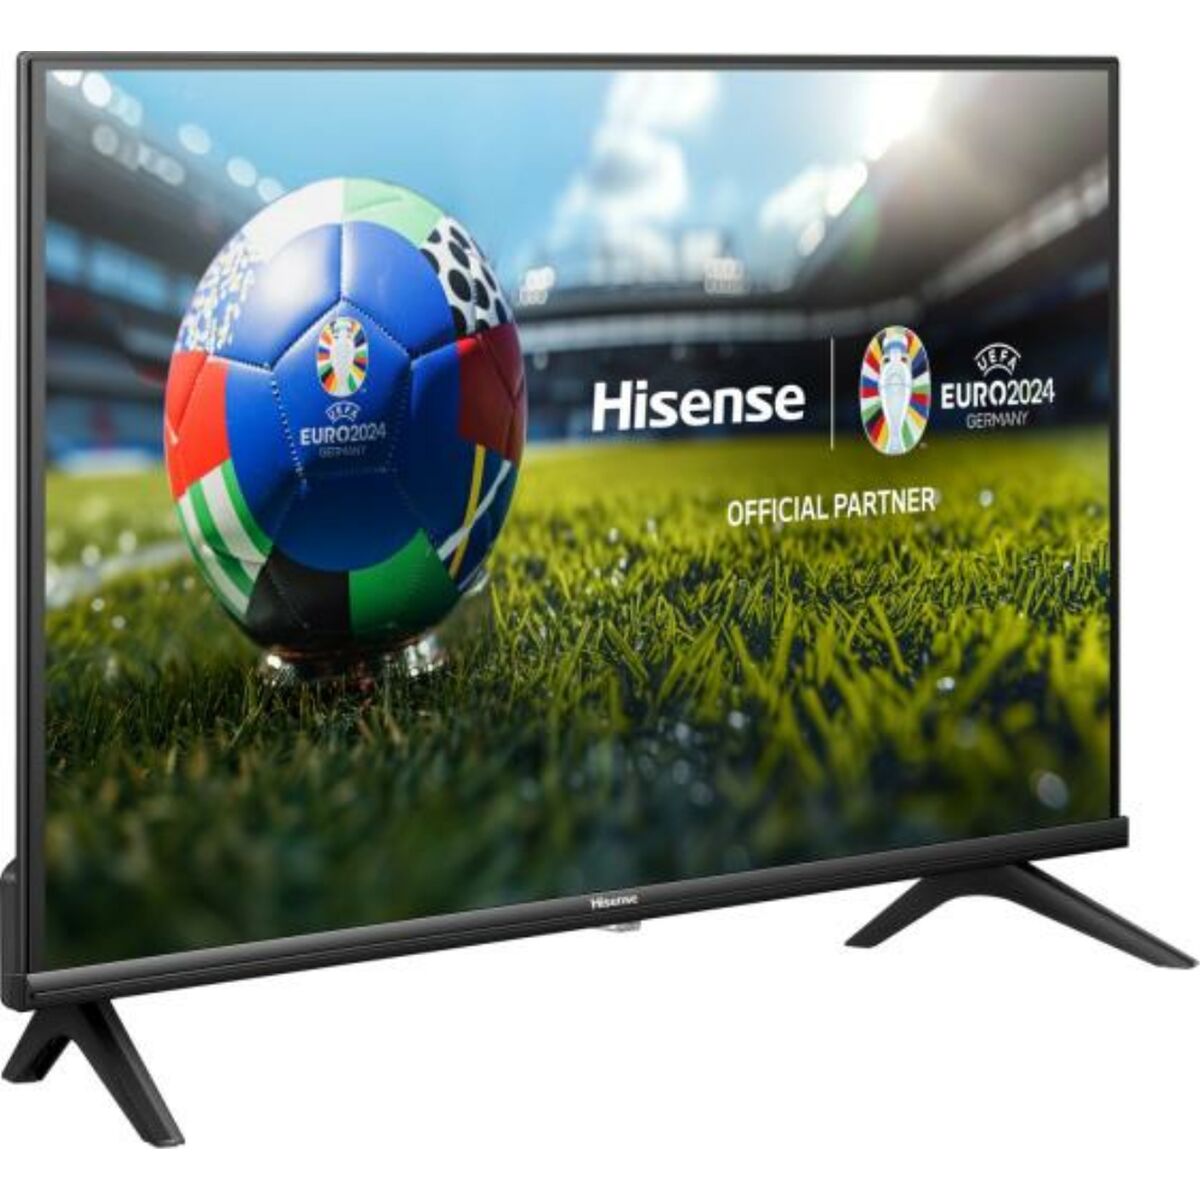 Smart TV Hisense 32A4N HD LED D-LED, Hisense, Electronics, TV, Video and home cinema, smart-tv-hisense-32a4n-hd-led-d-led, Brand_Hisense, category-reference-2609, category-reference-2625, category-reference-2931, category-reference-t-18805, category-reference-t-18827, category-reference-t-19653, cinema and television, Condition_NEW, entertainment, Price_200 - 300, RiotNook